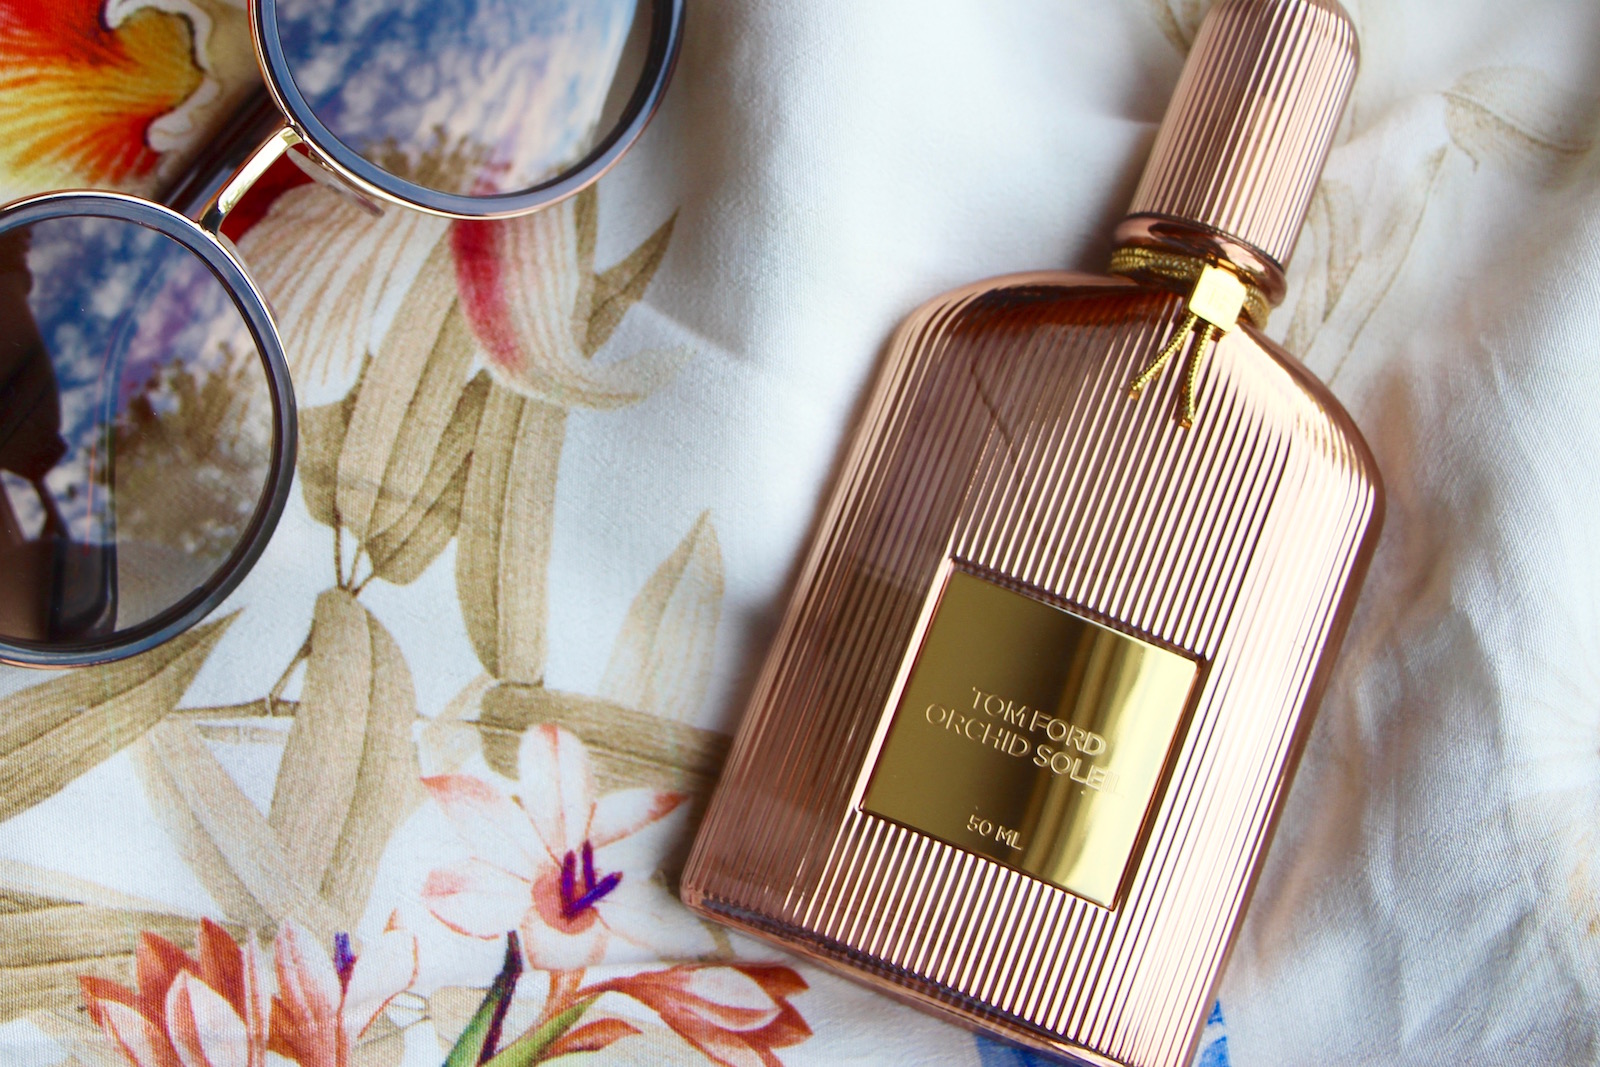 Tom Ford Orchid Soleil : Liquidised Holiday Vibes